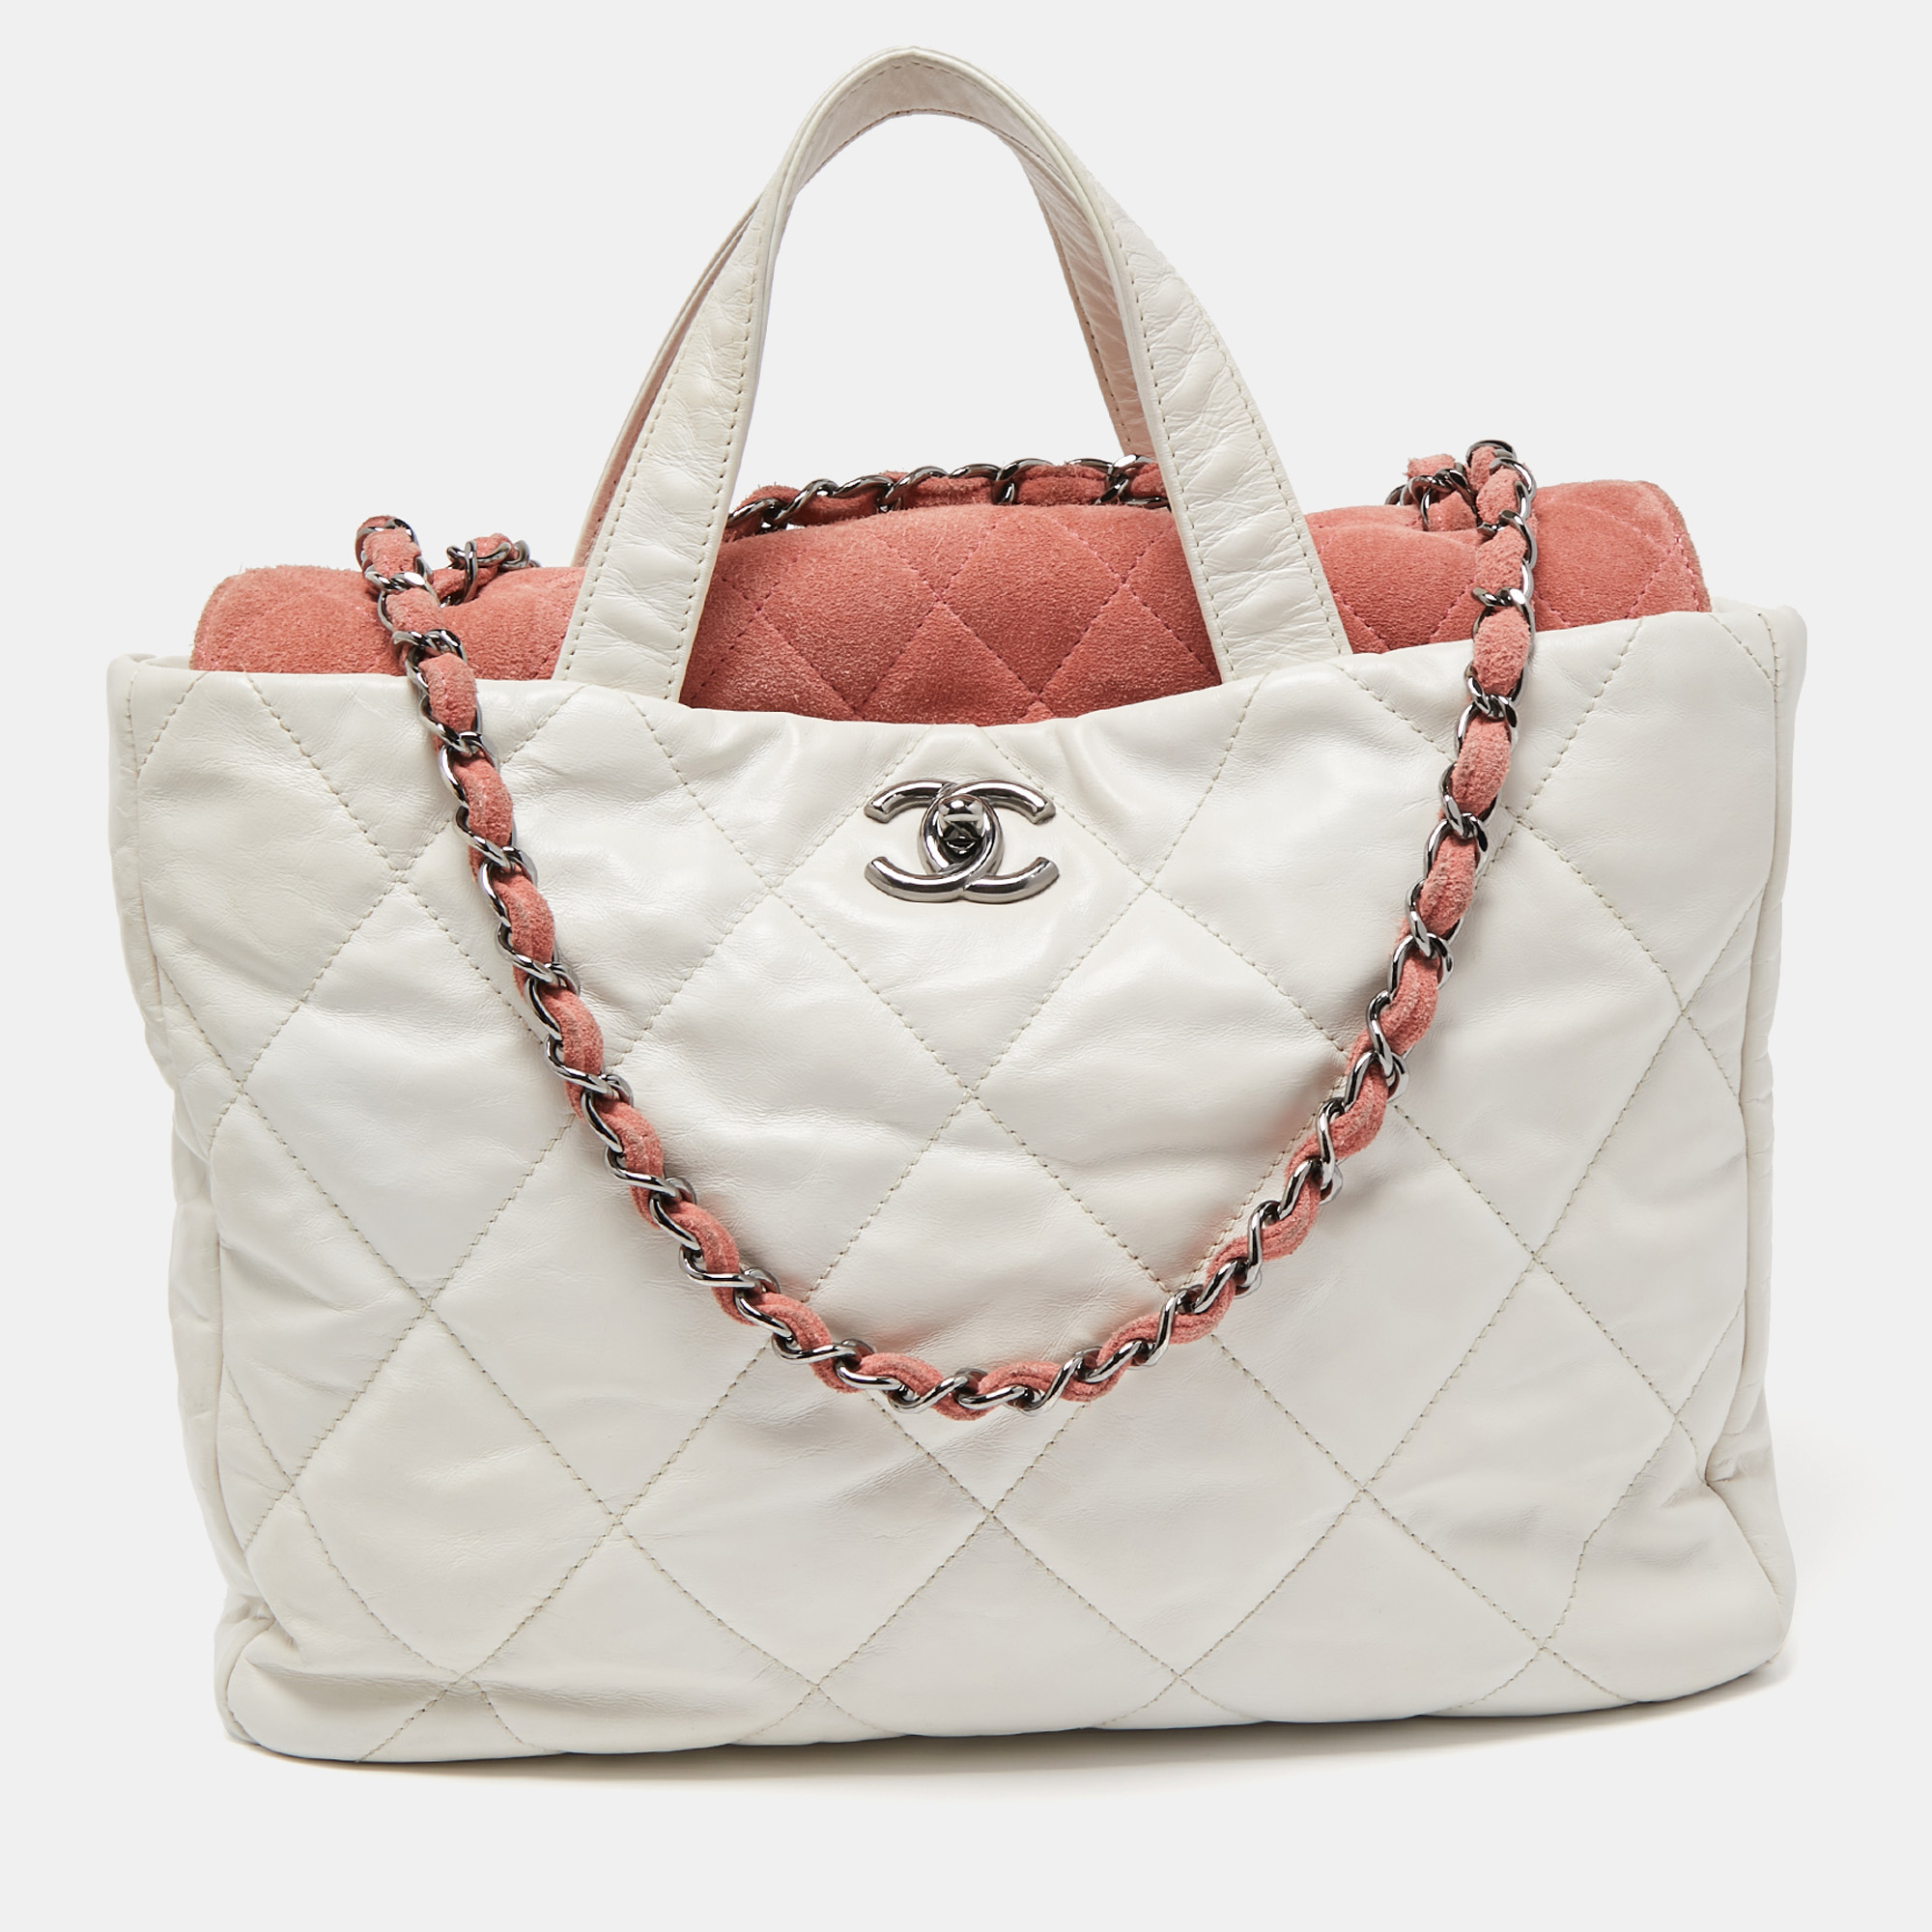 Chanel White/Pink Quilted Leather And Suede Portobello Tote